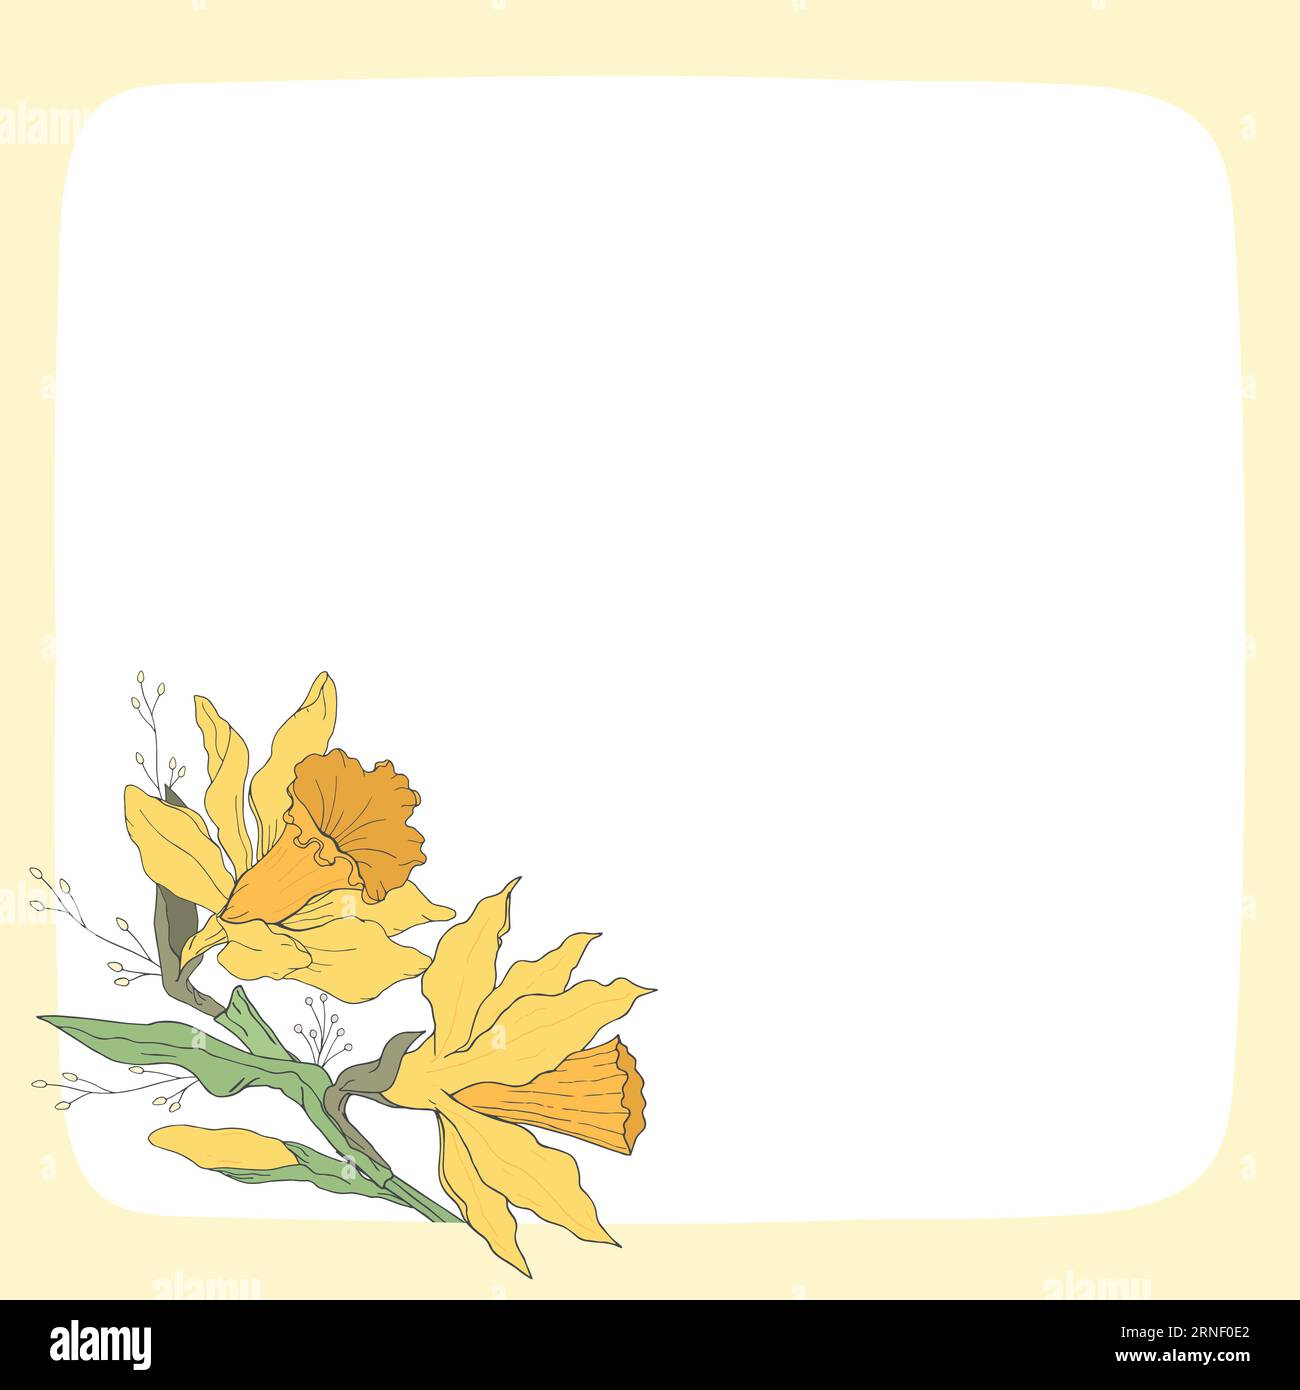 Daffodil floral template. Narcissus. Square frame with hand drawn flowers. For cards, invitations, save the date cards Stock Vector